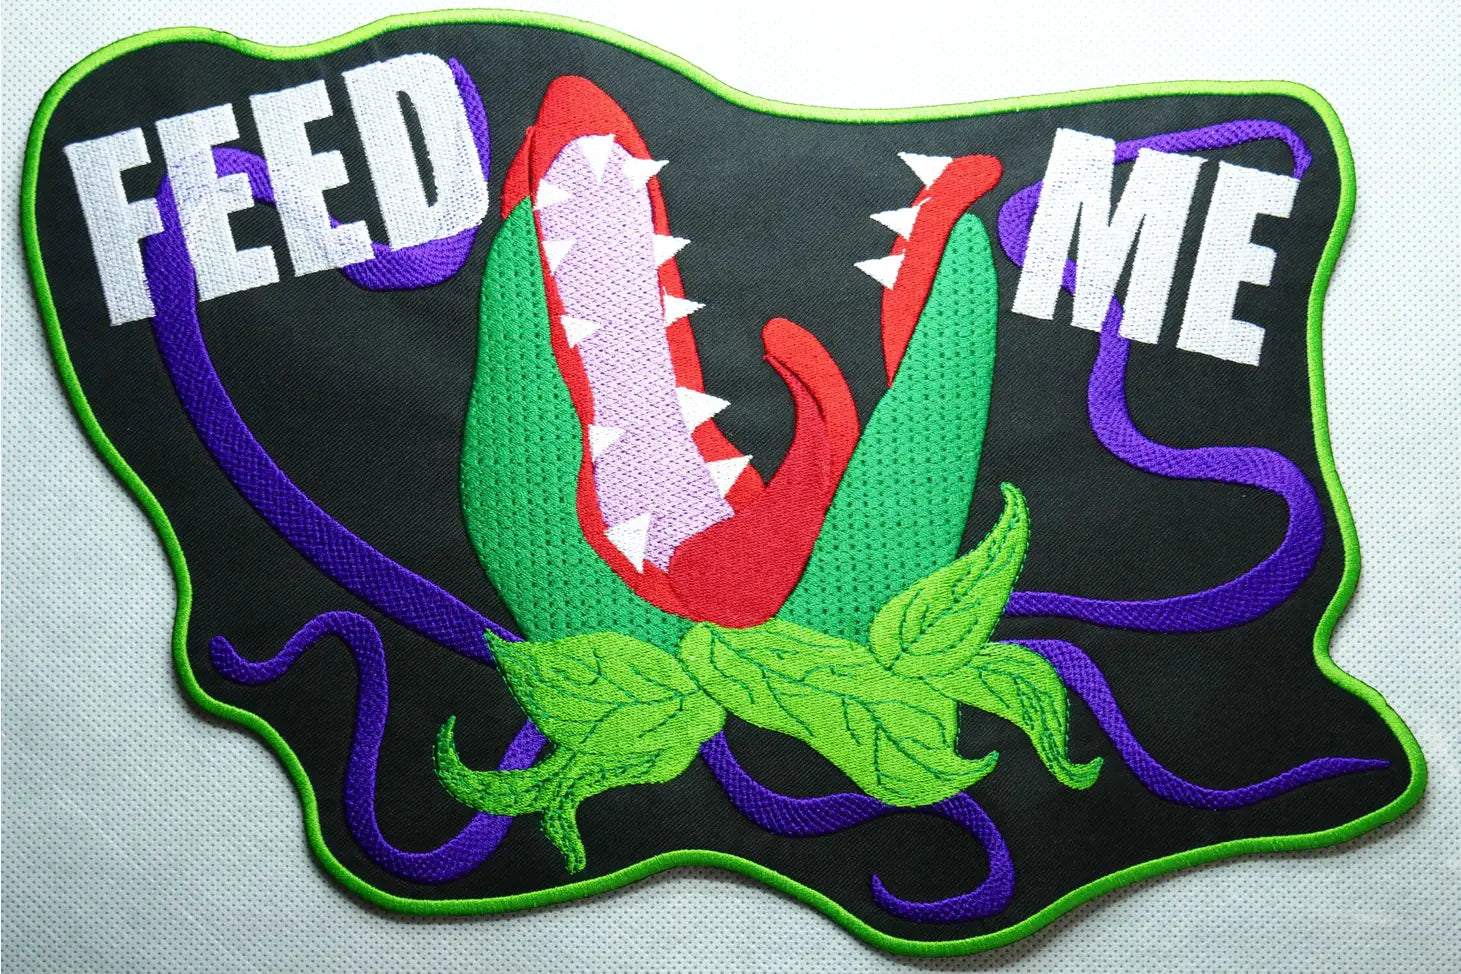 A back patch of Audrey 2 from Little Shop of Horrors in green, red, and purple with white "FEED ME" text embroidered on a green-bordered black twill patch.